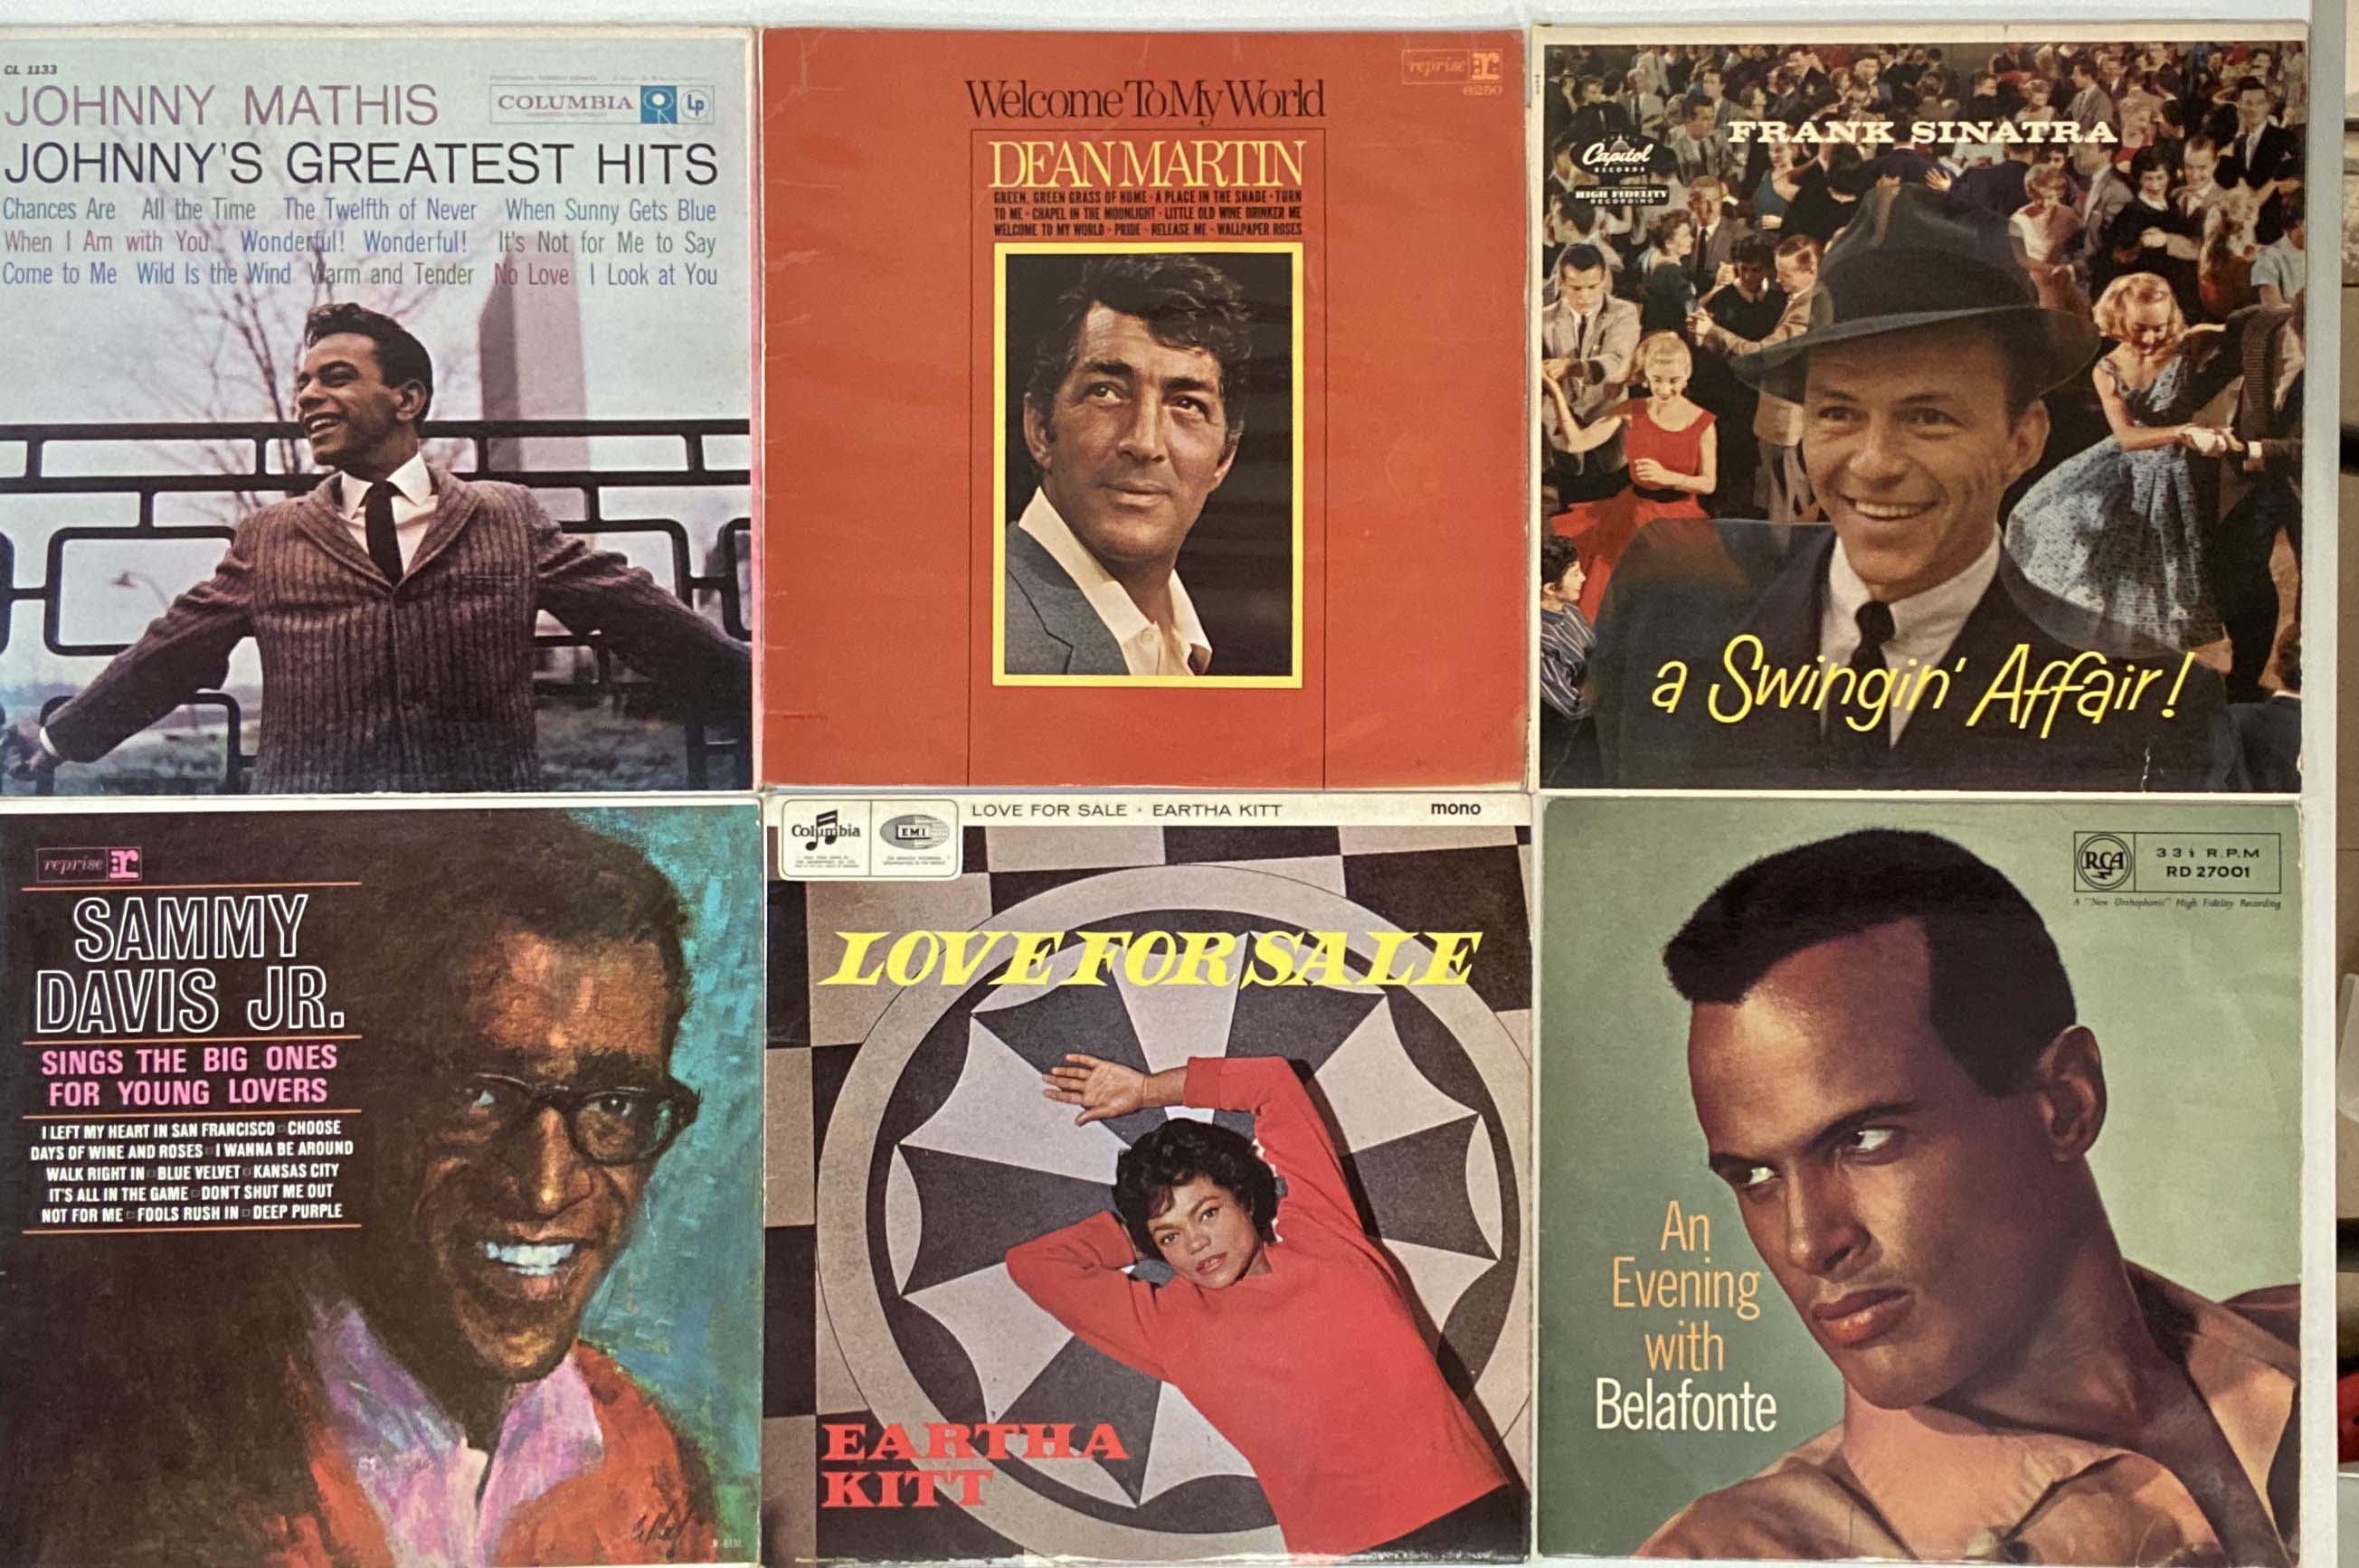 TORCH/SOUNDTRACK/RAT PACK/EXOTICA/COMEDY/COUNTRY/EASY - LPs. - Image 5 of 6